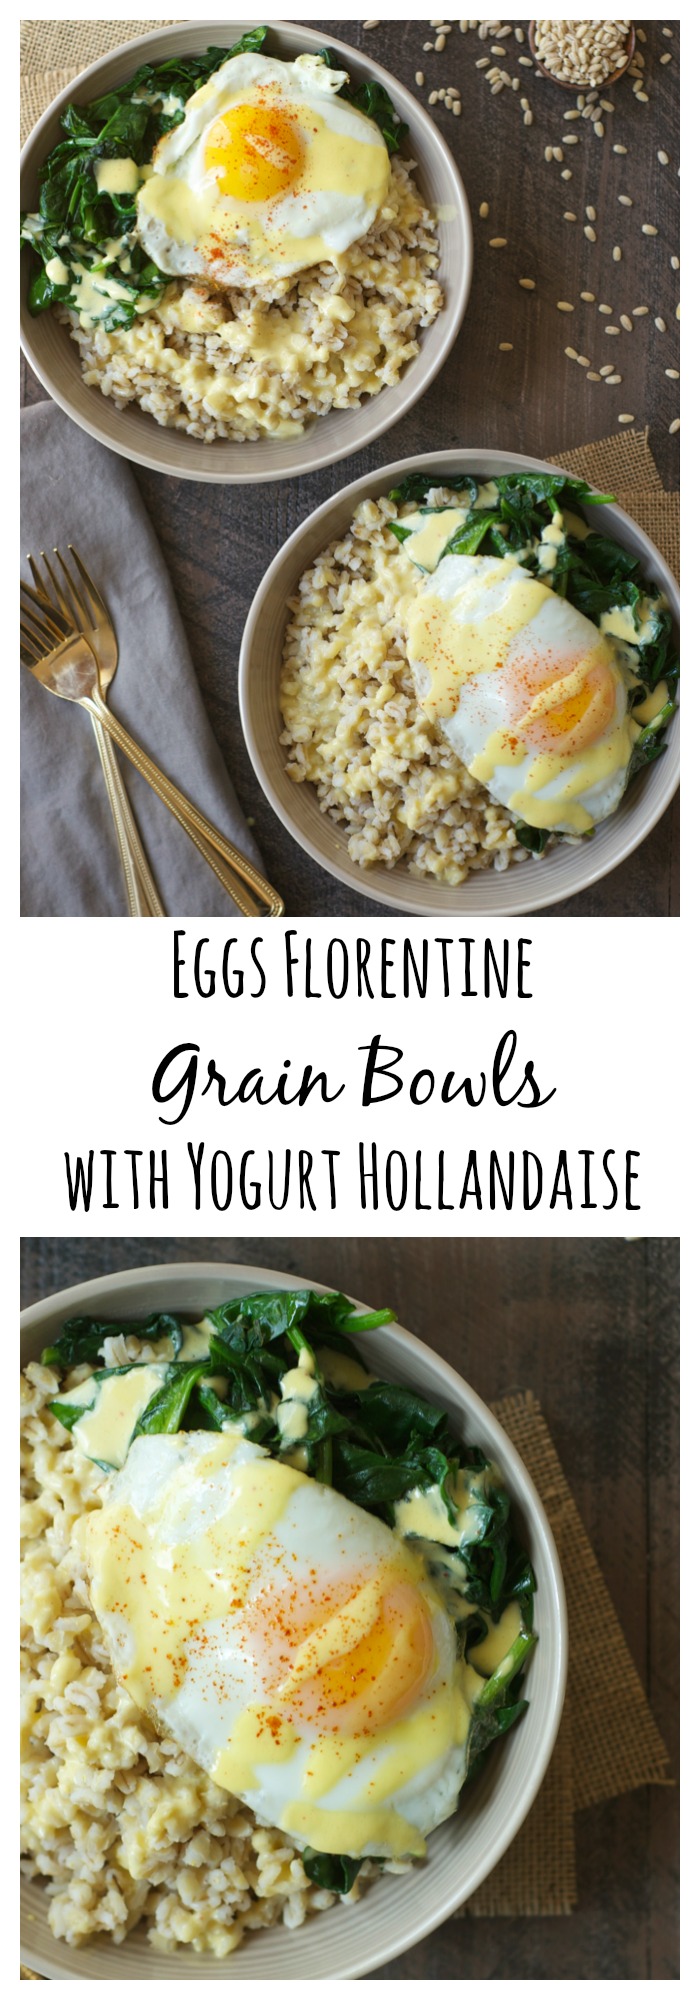 These eggs Florentine grain bowls are topped with a light and healthy yogurt hollandaise. Delicious for weekend brunch, yet simple enough for a weeknight dinner!